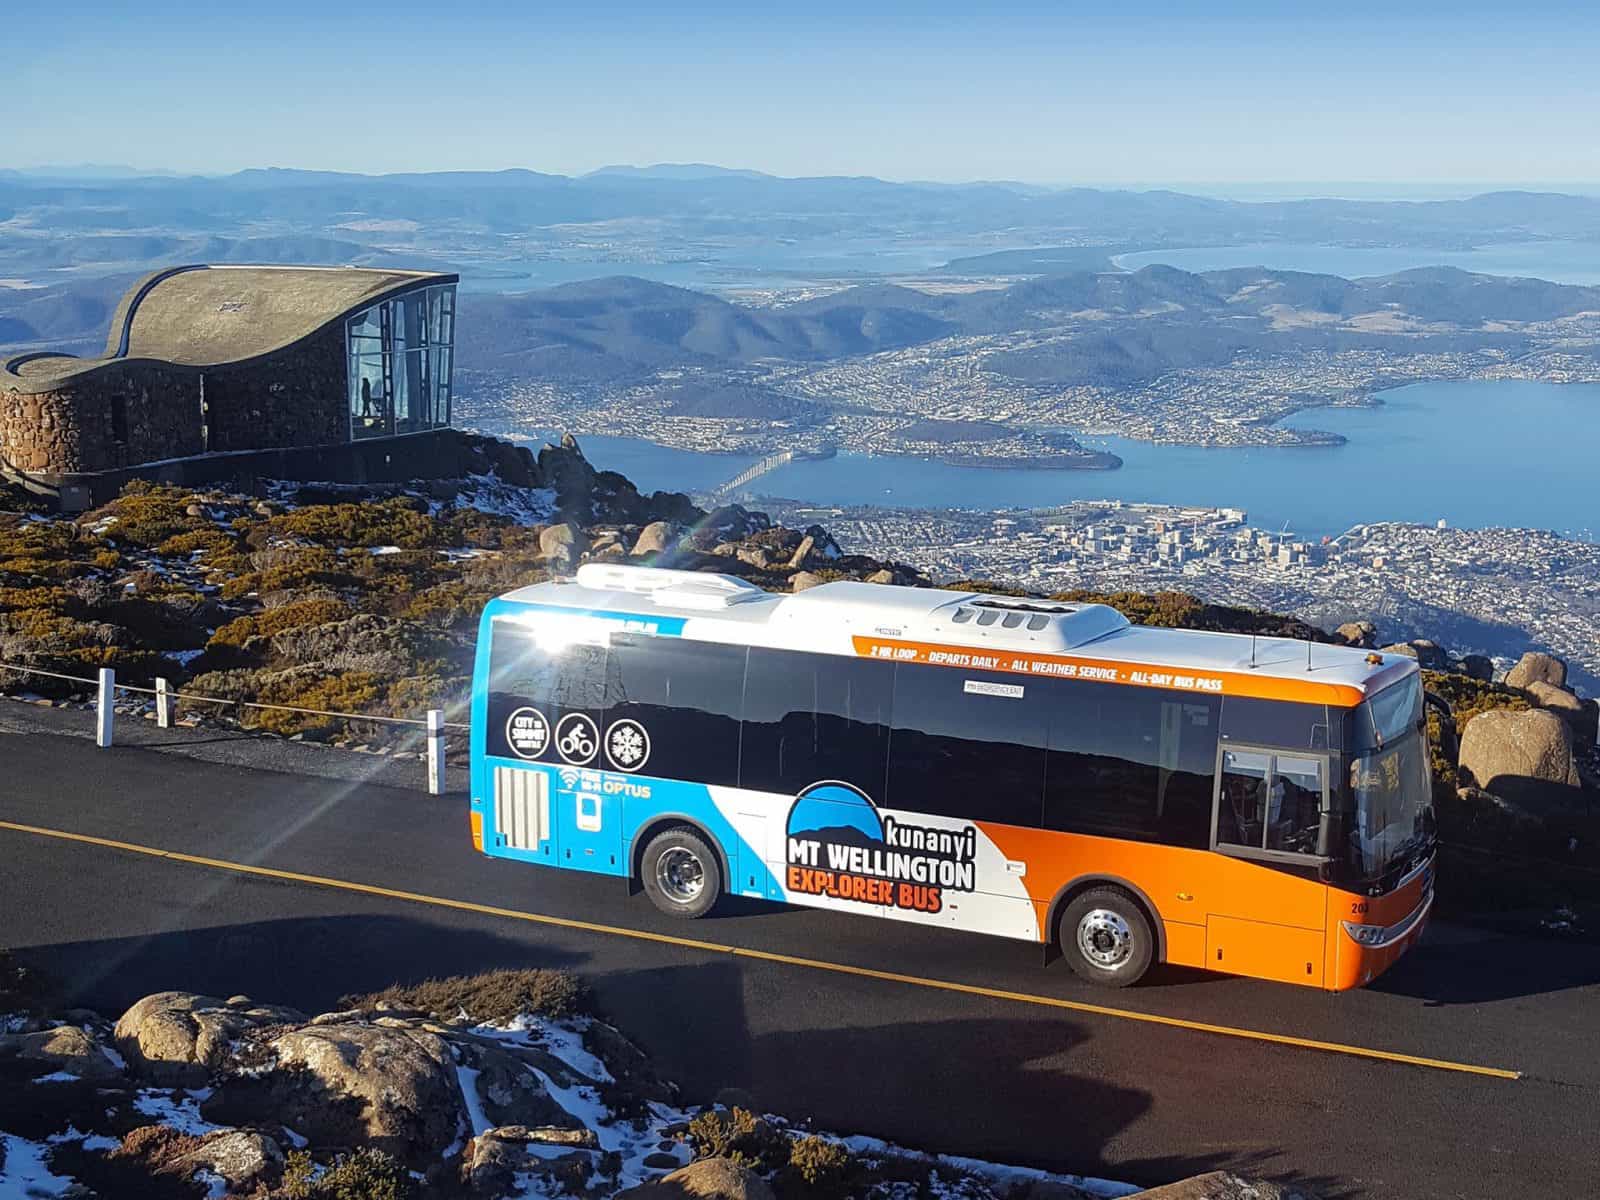 Bus parked at the summit of the mountain with panoramic views of the city below.